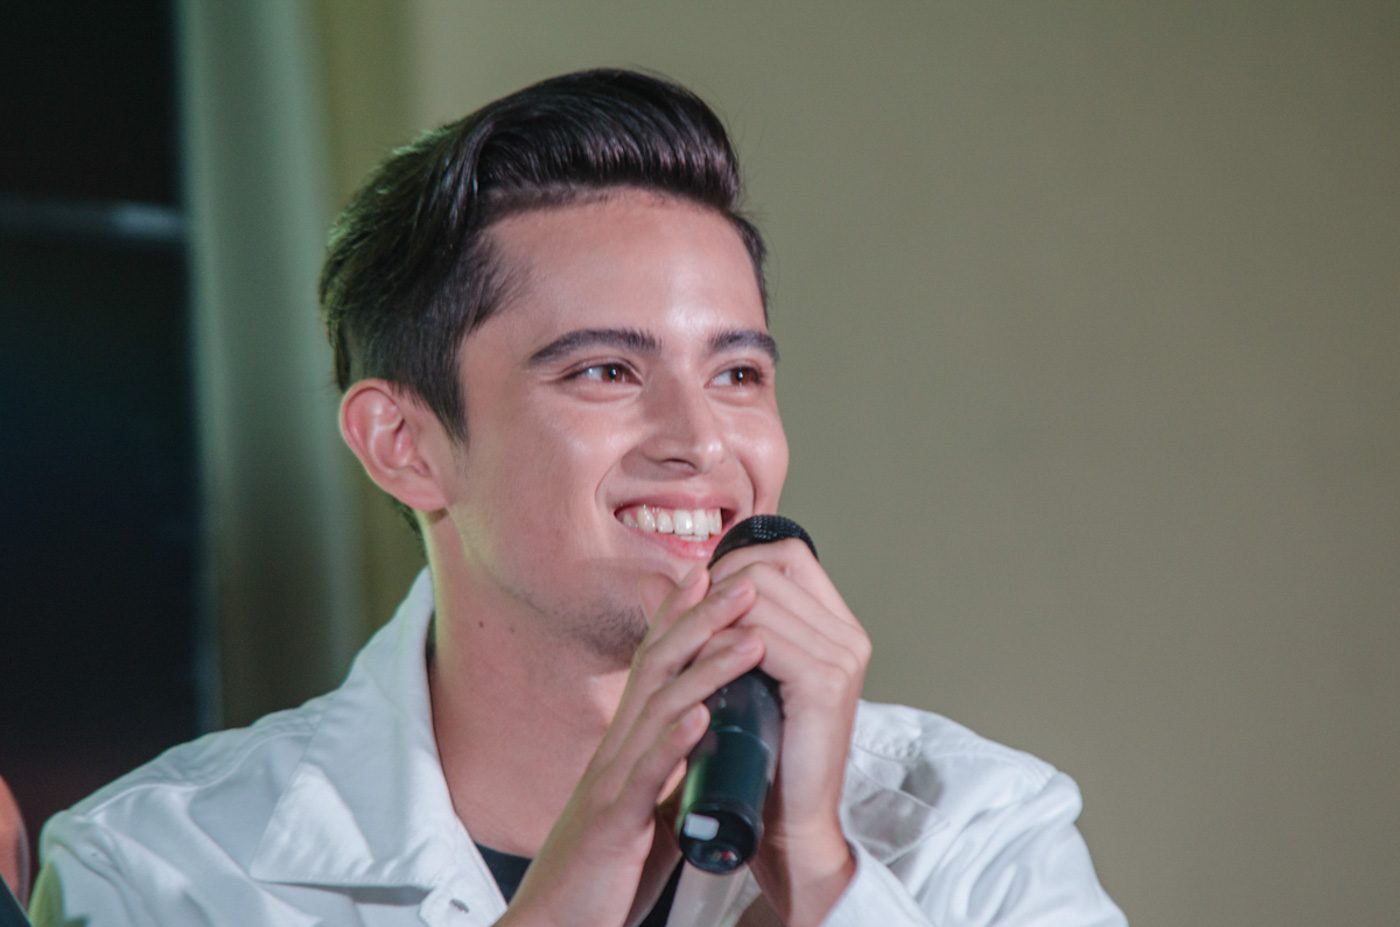 MORE MUSIC. James Reid says unlike in the first concert, 'Revolution' will show more of his and Nadine's original compositions and music style 